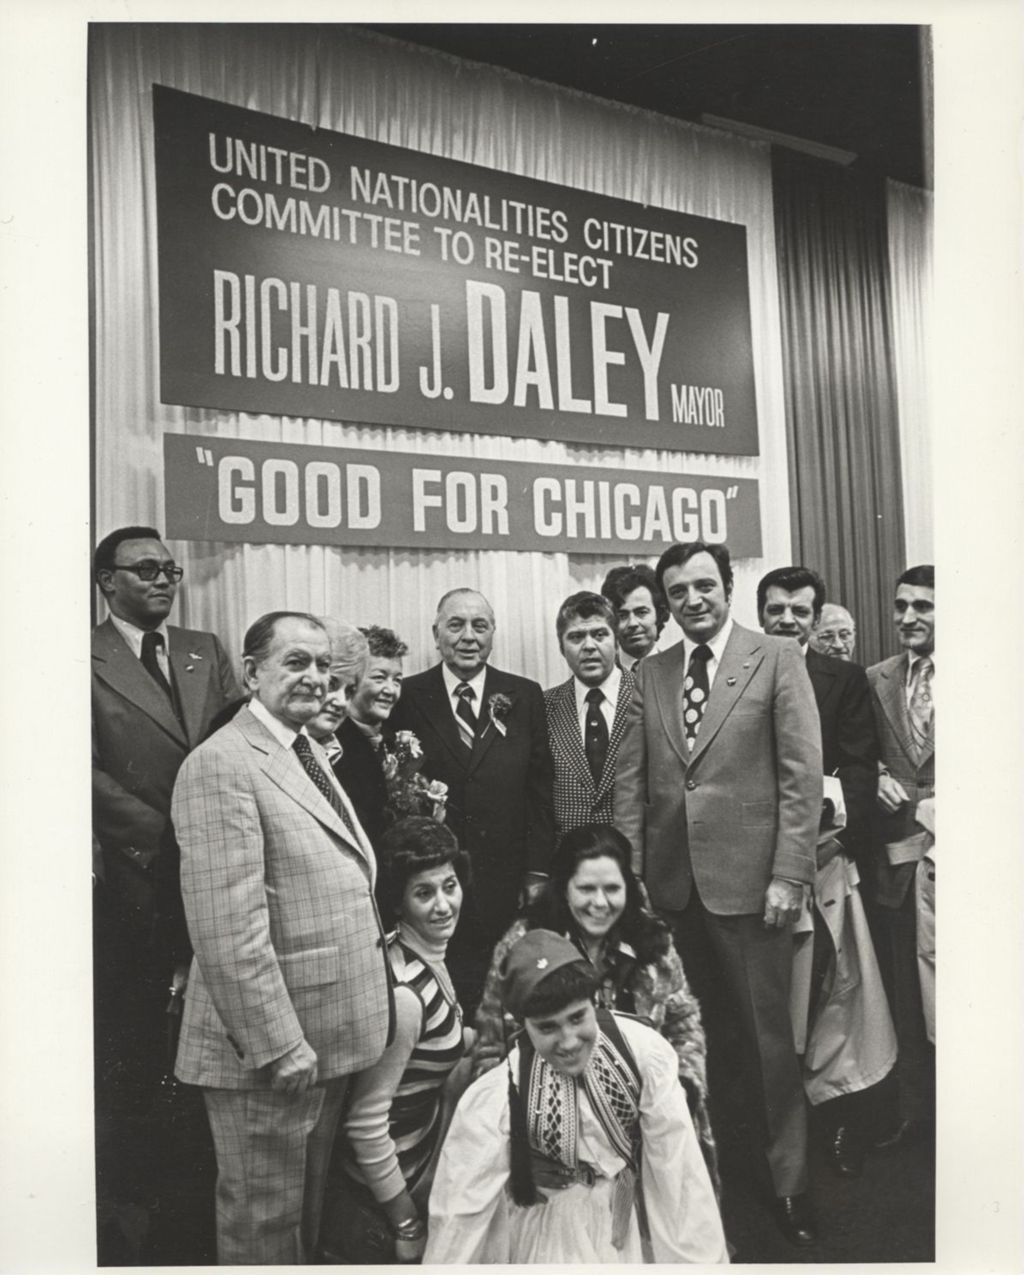 Miniature of Richard J. and Eleanor Daley with others at a United Nationalities Citizens Committee campaign event